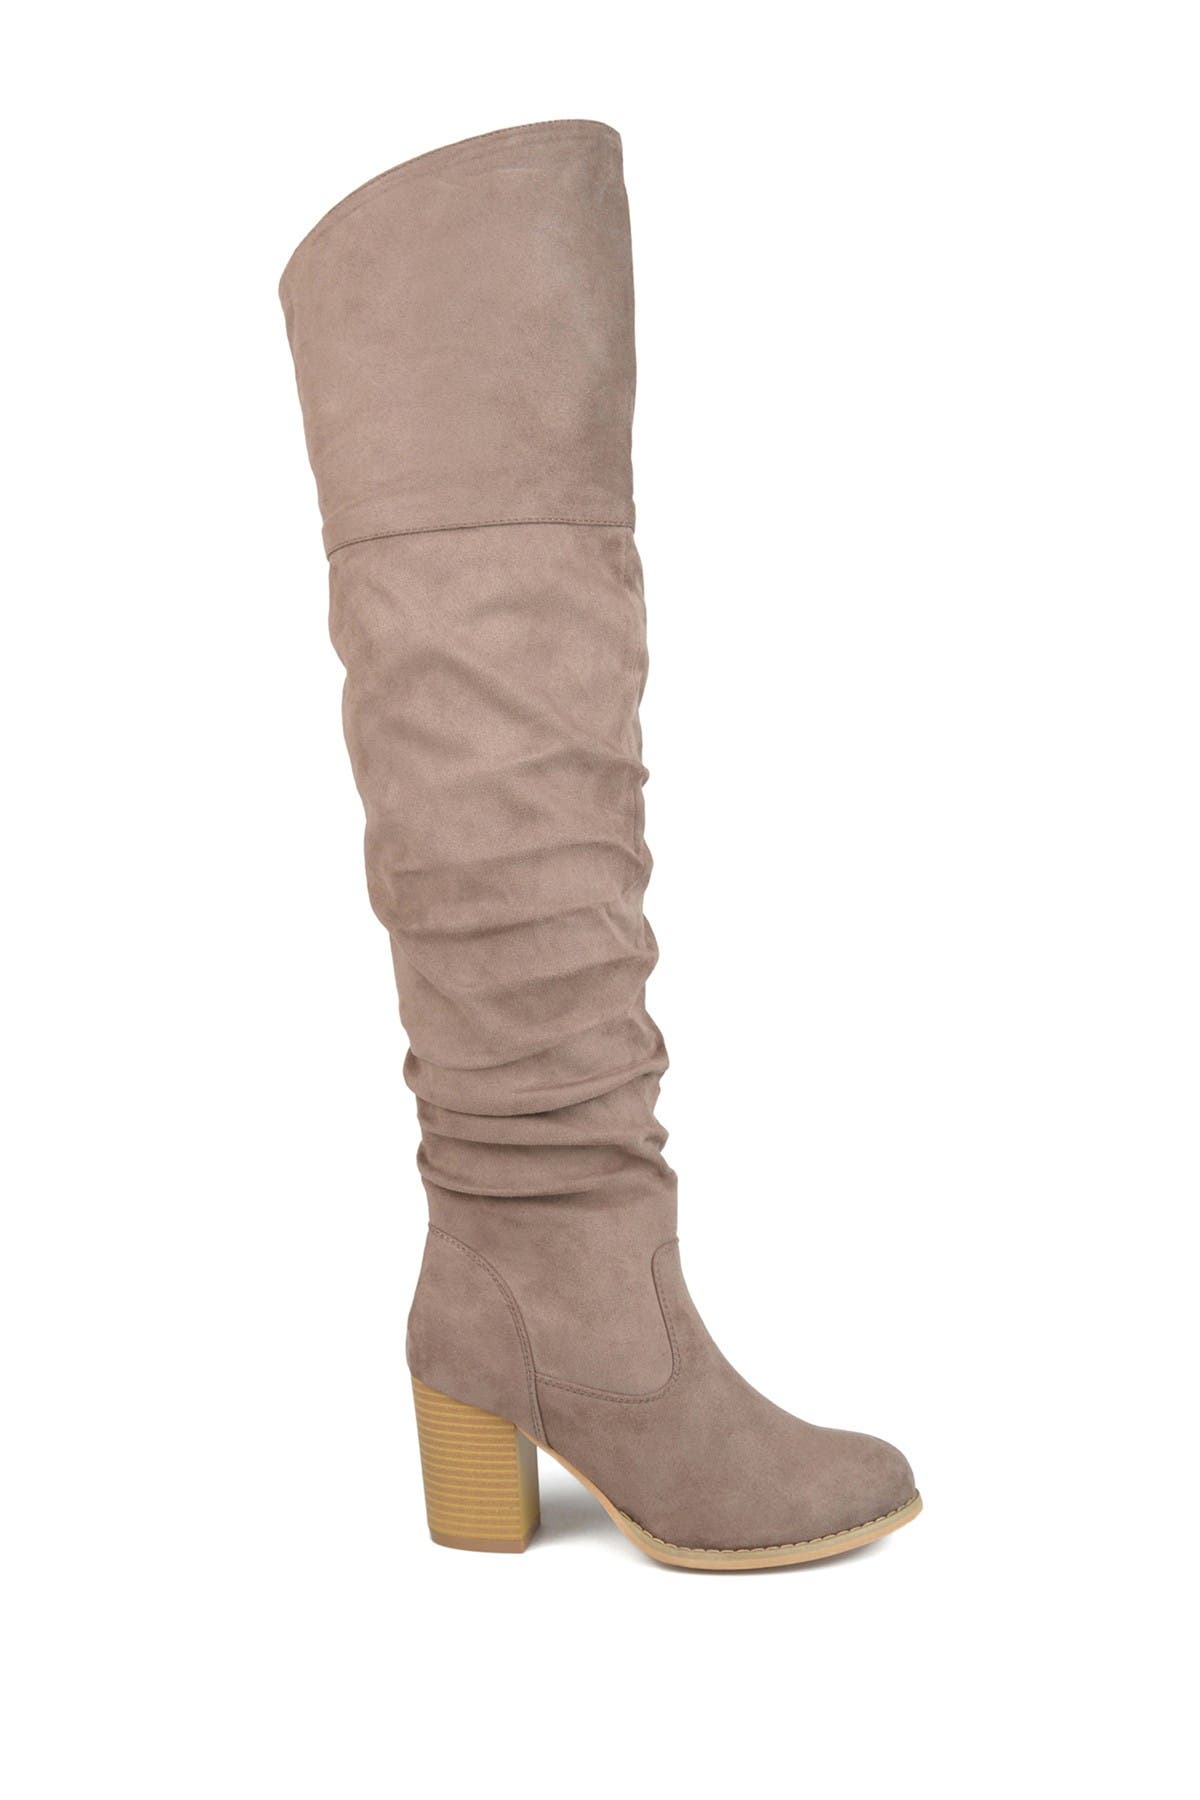 Journee Collection Kaison Ruched Tall Boot In Medium Beige